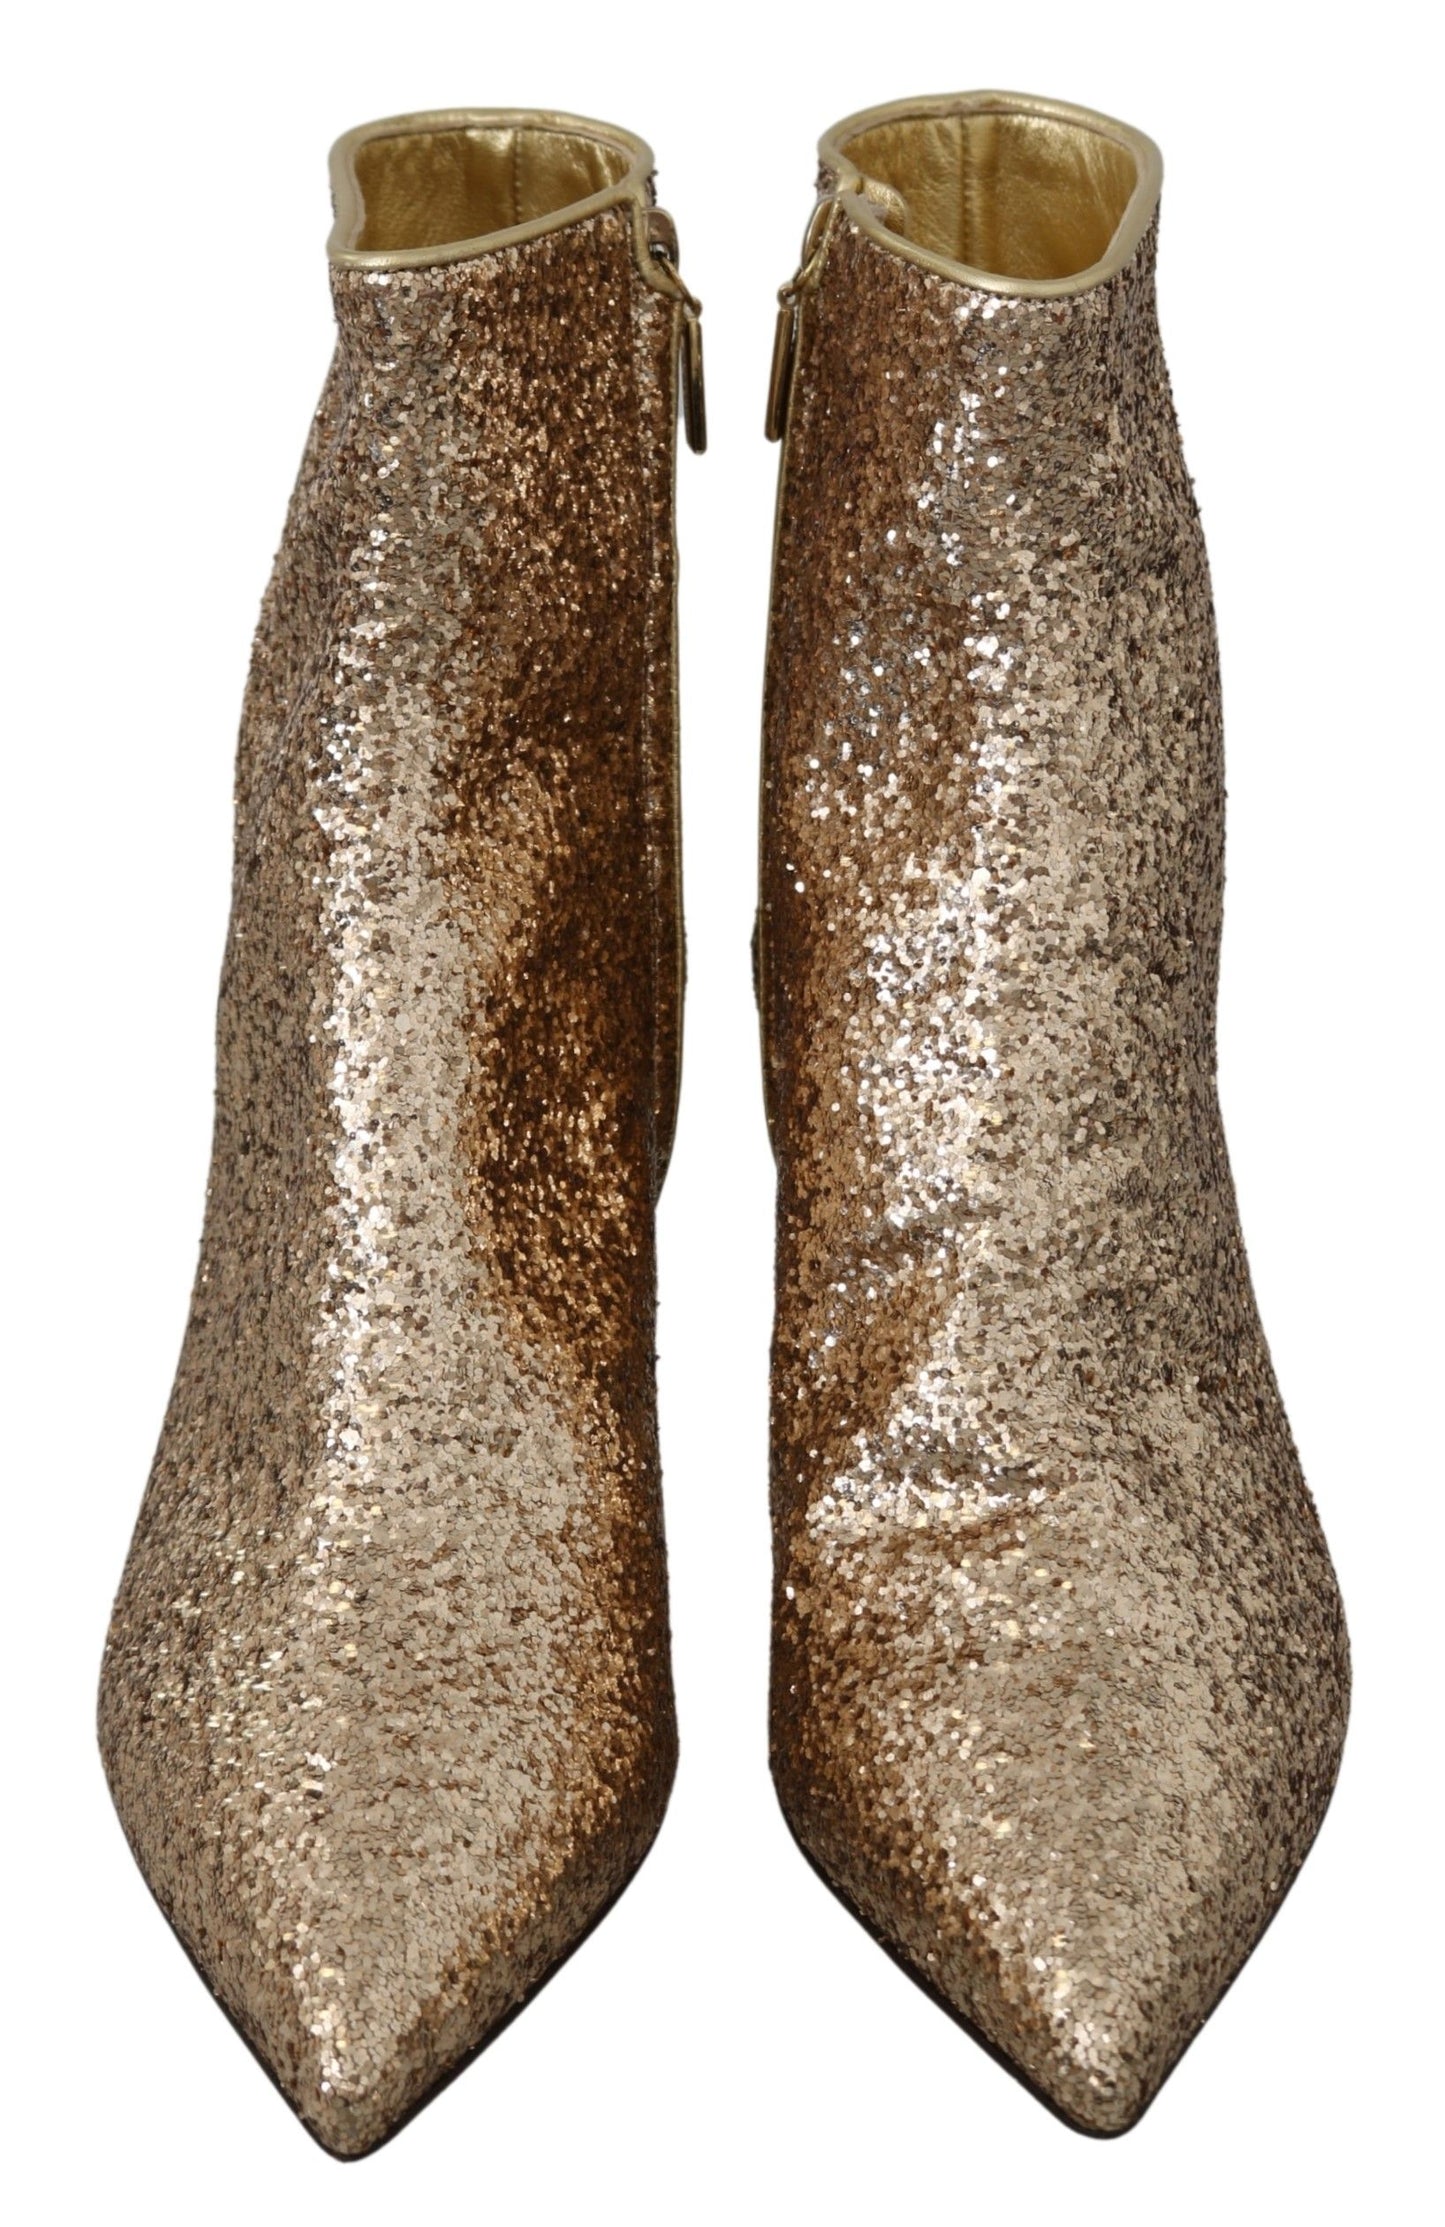 Glimmering Gold Sequined Leather Boots